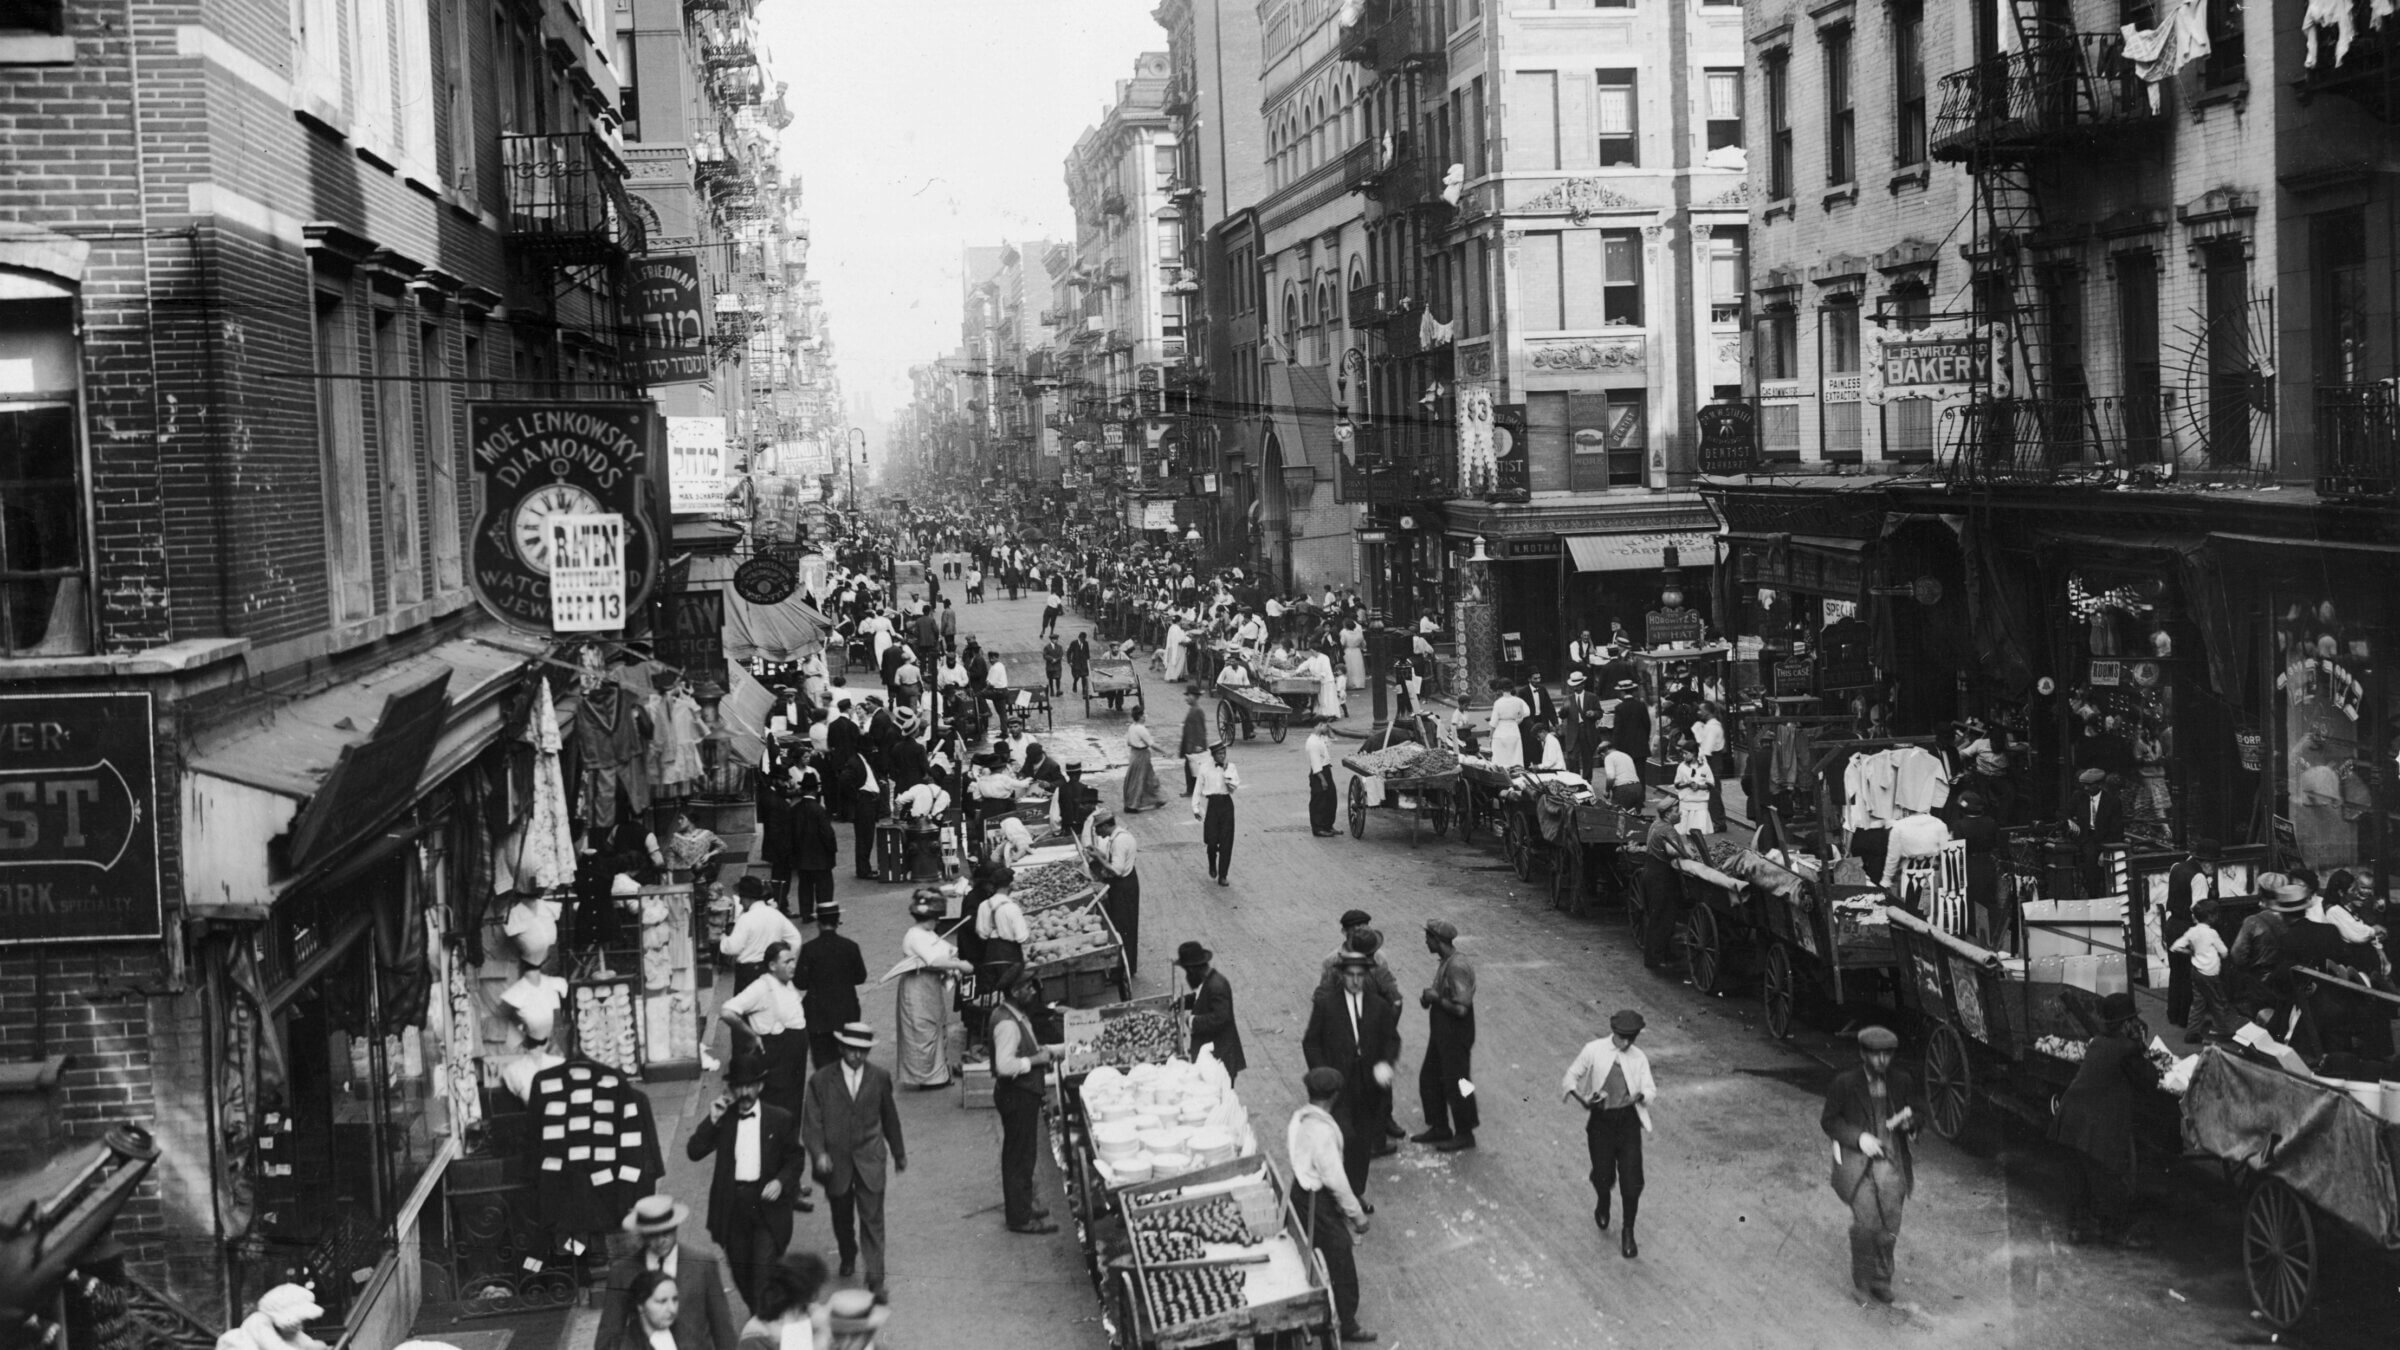 Delancey Street at the beginning of the 20th century.